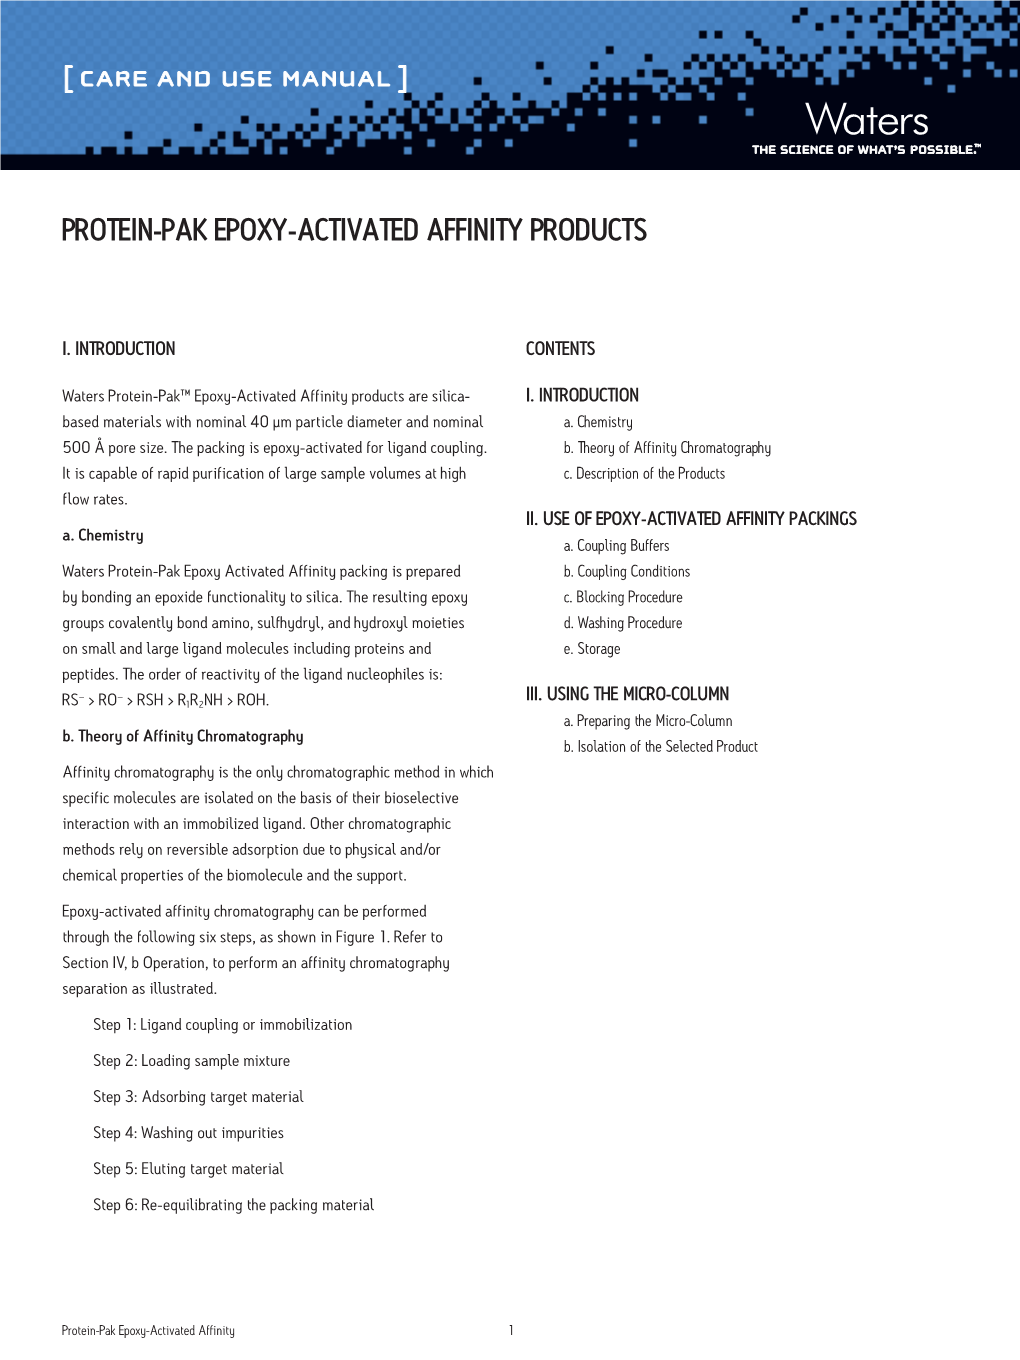 Protein-Pak Epoxy-Activated Affinity Products